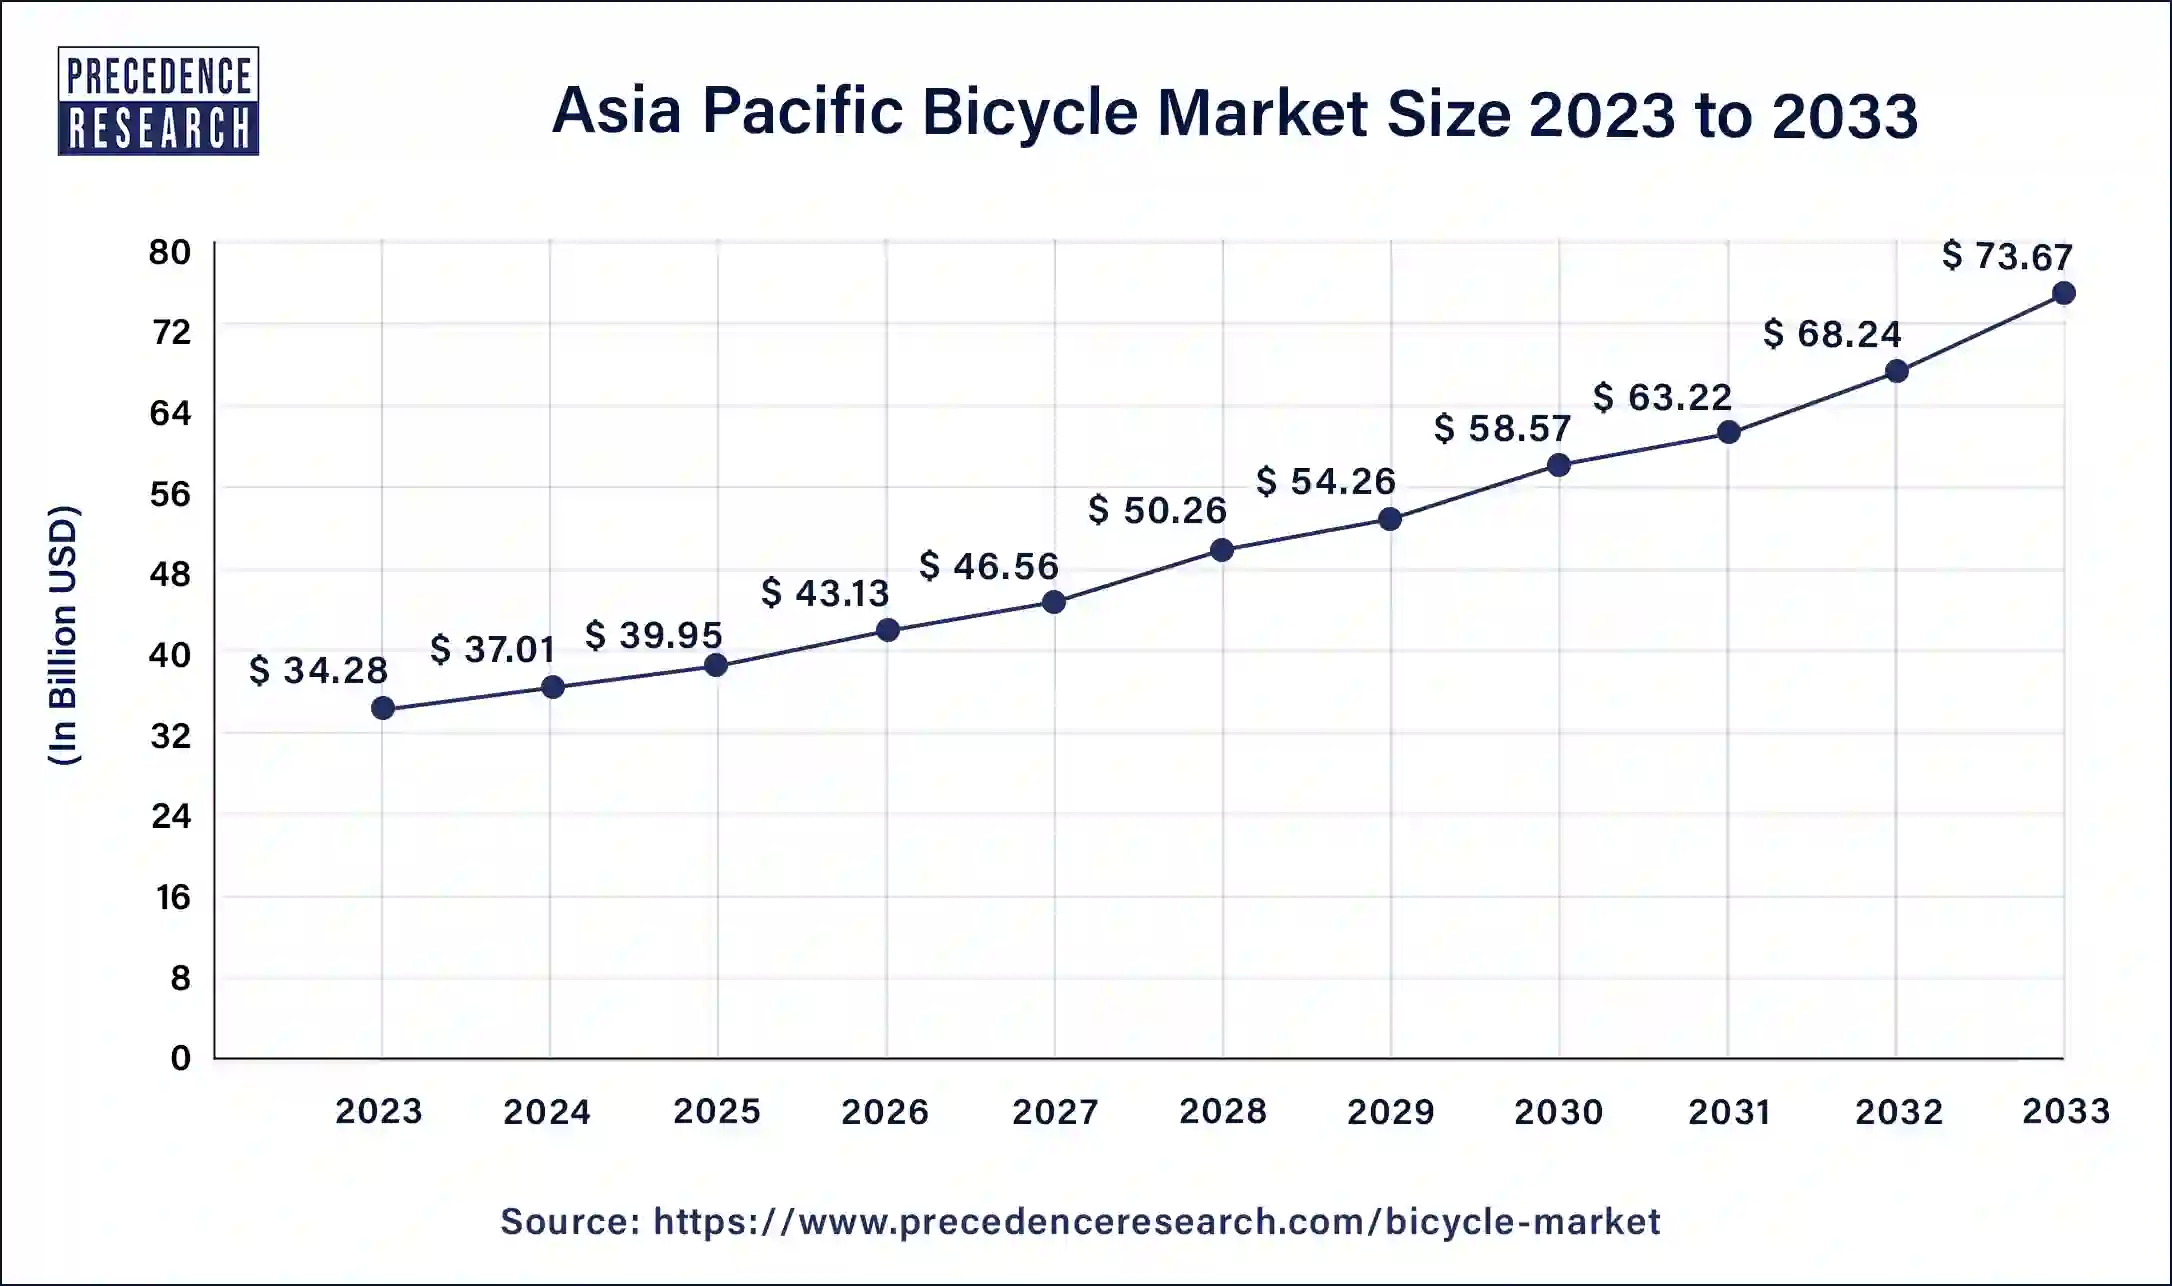 Asia Pacific Bicycle Market Size 2024 to 2033